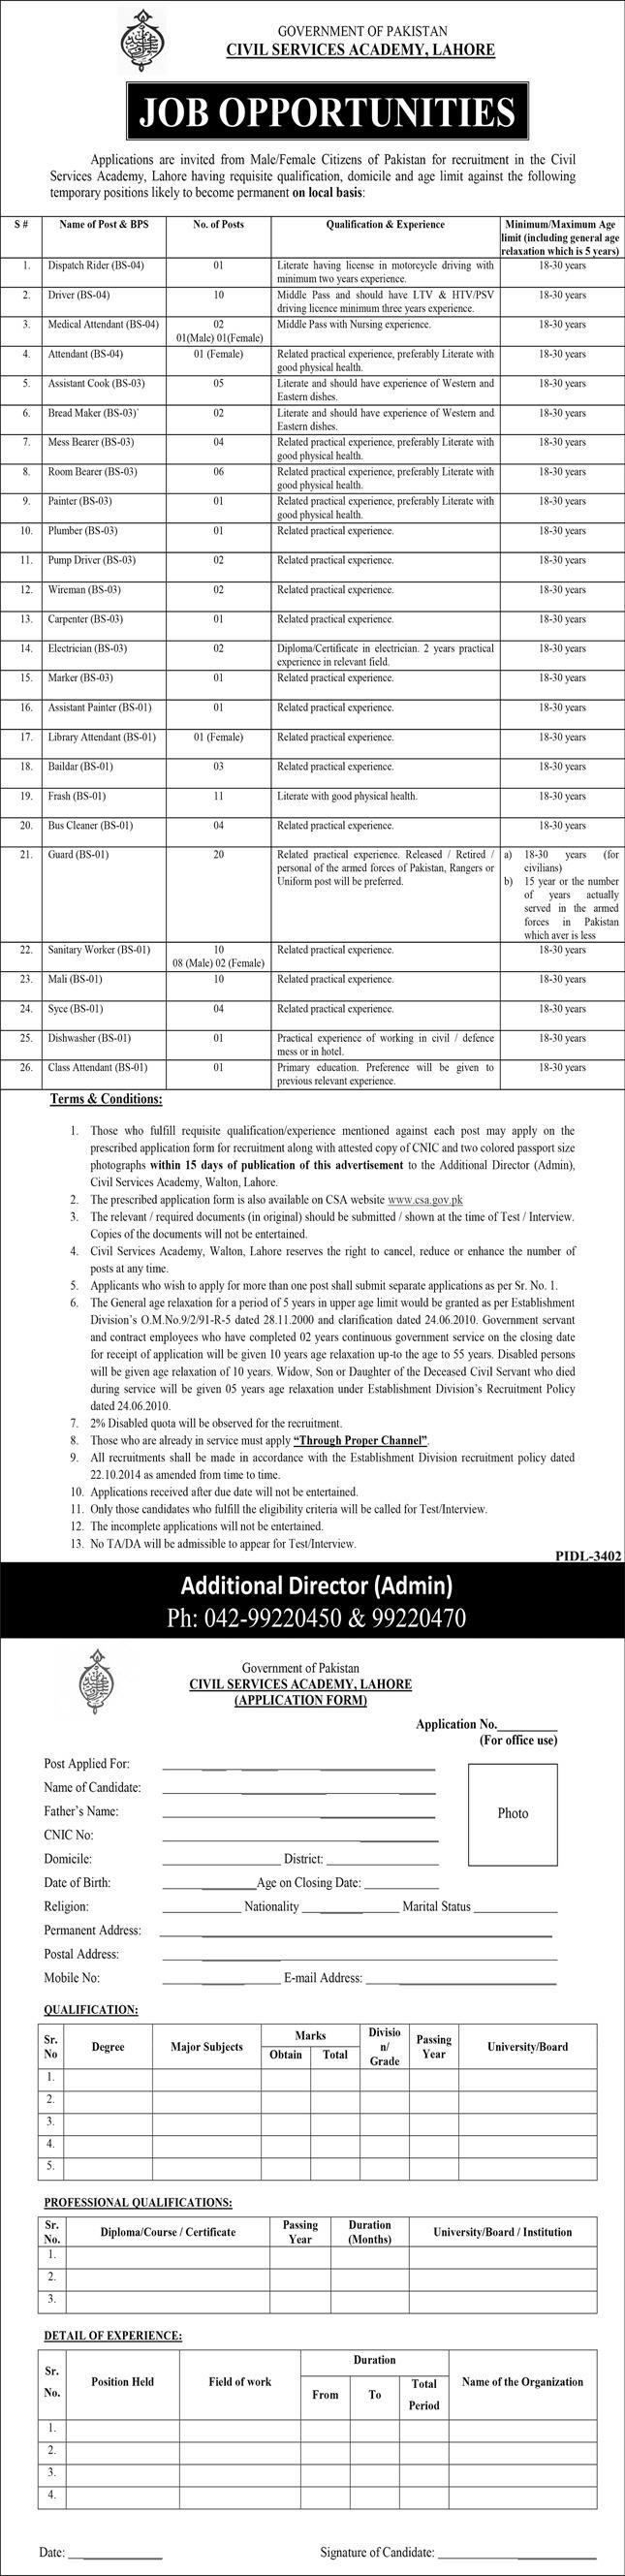 Civil Services Academy (CSA) Lahore Job Vacancies for Males and Females